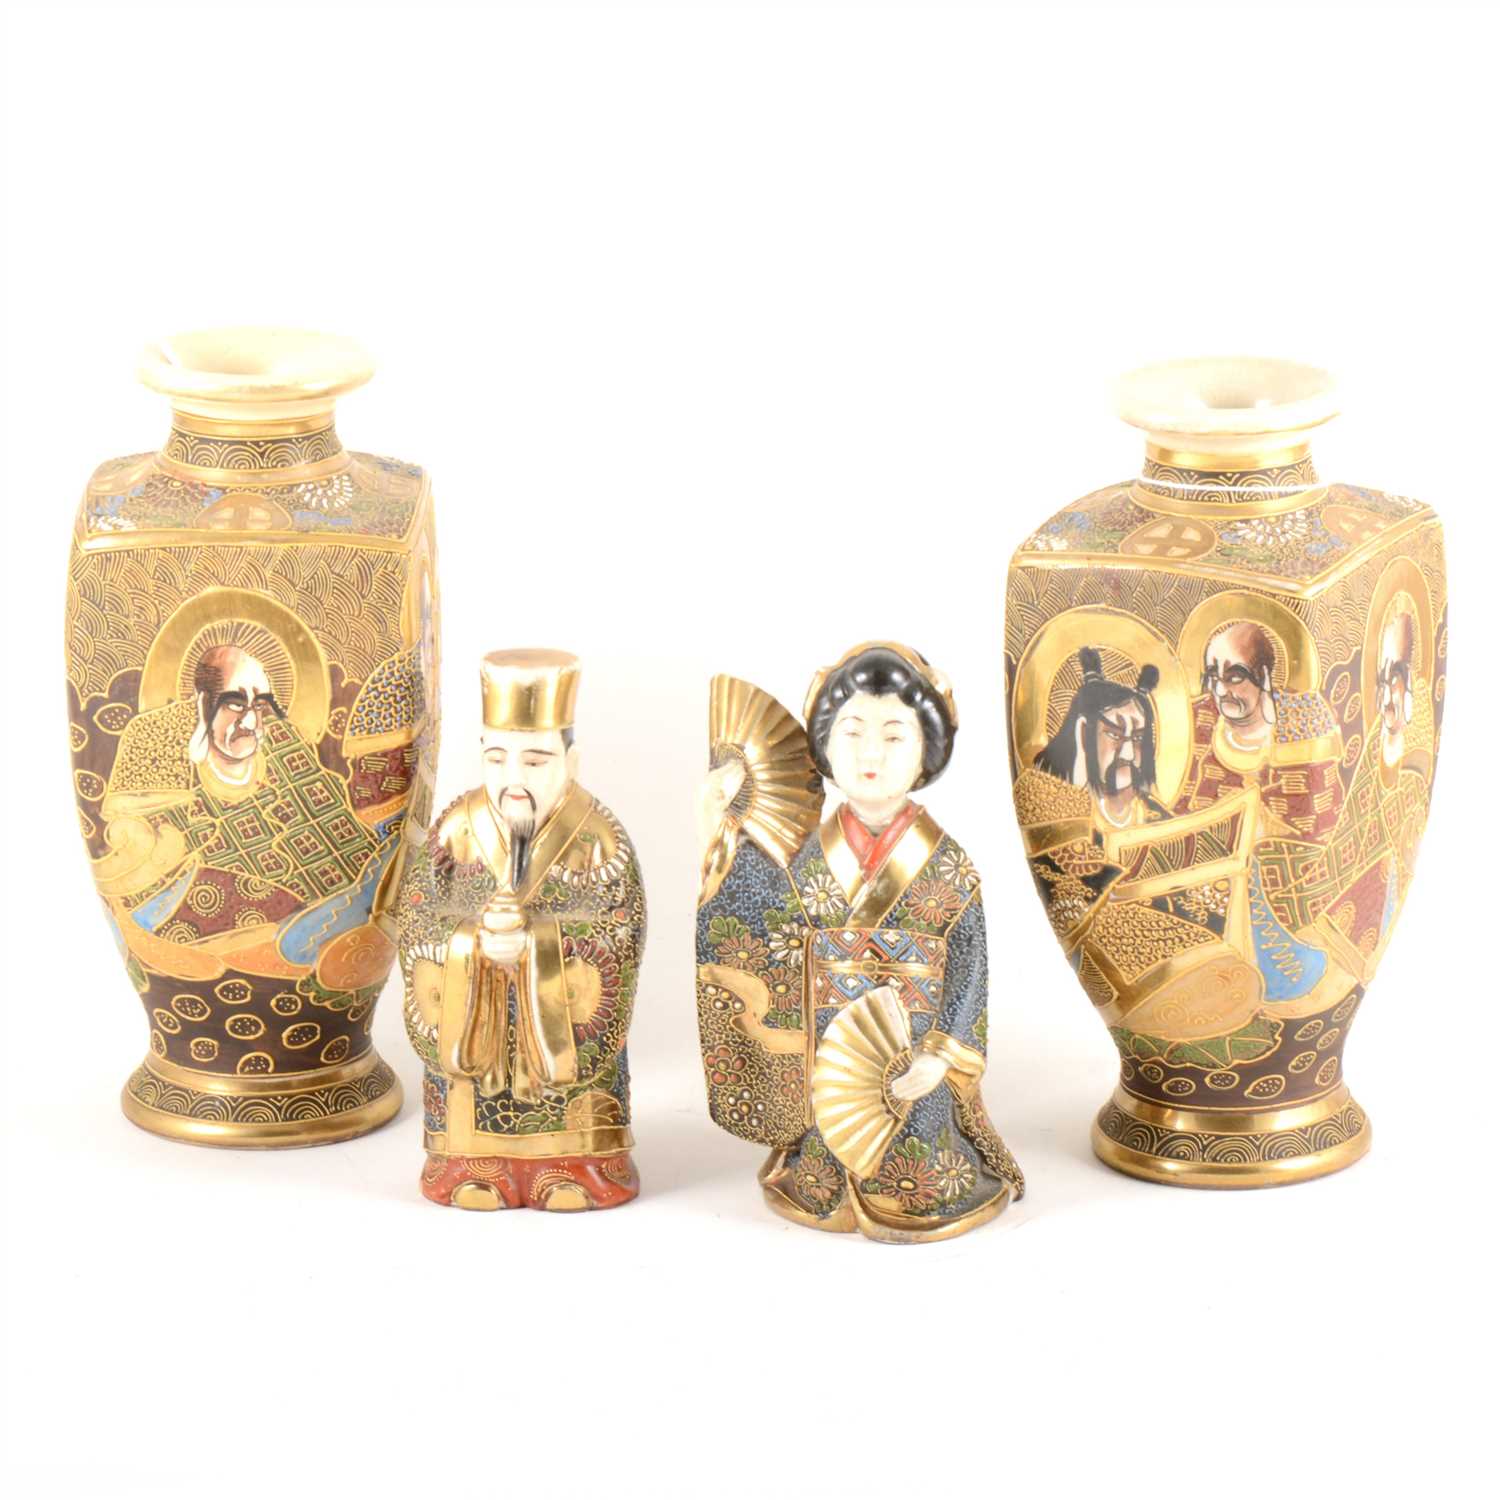 Lot 63 - A pair of Satsuma pottery vases, and a pair of Satsuma figures.